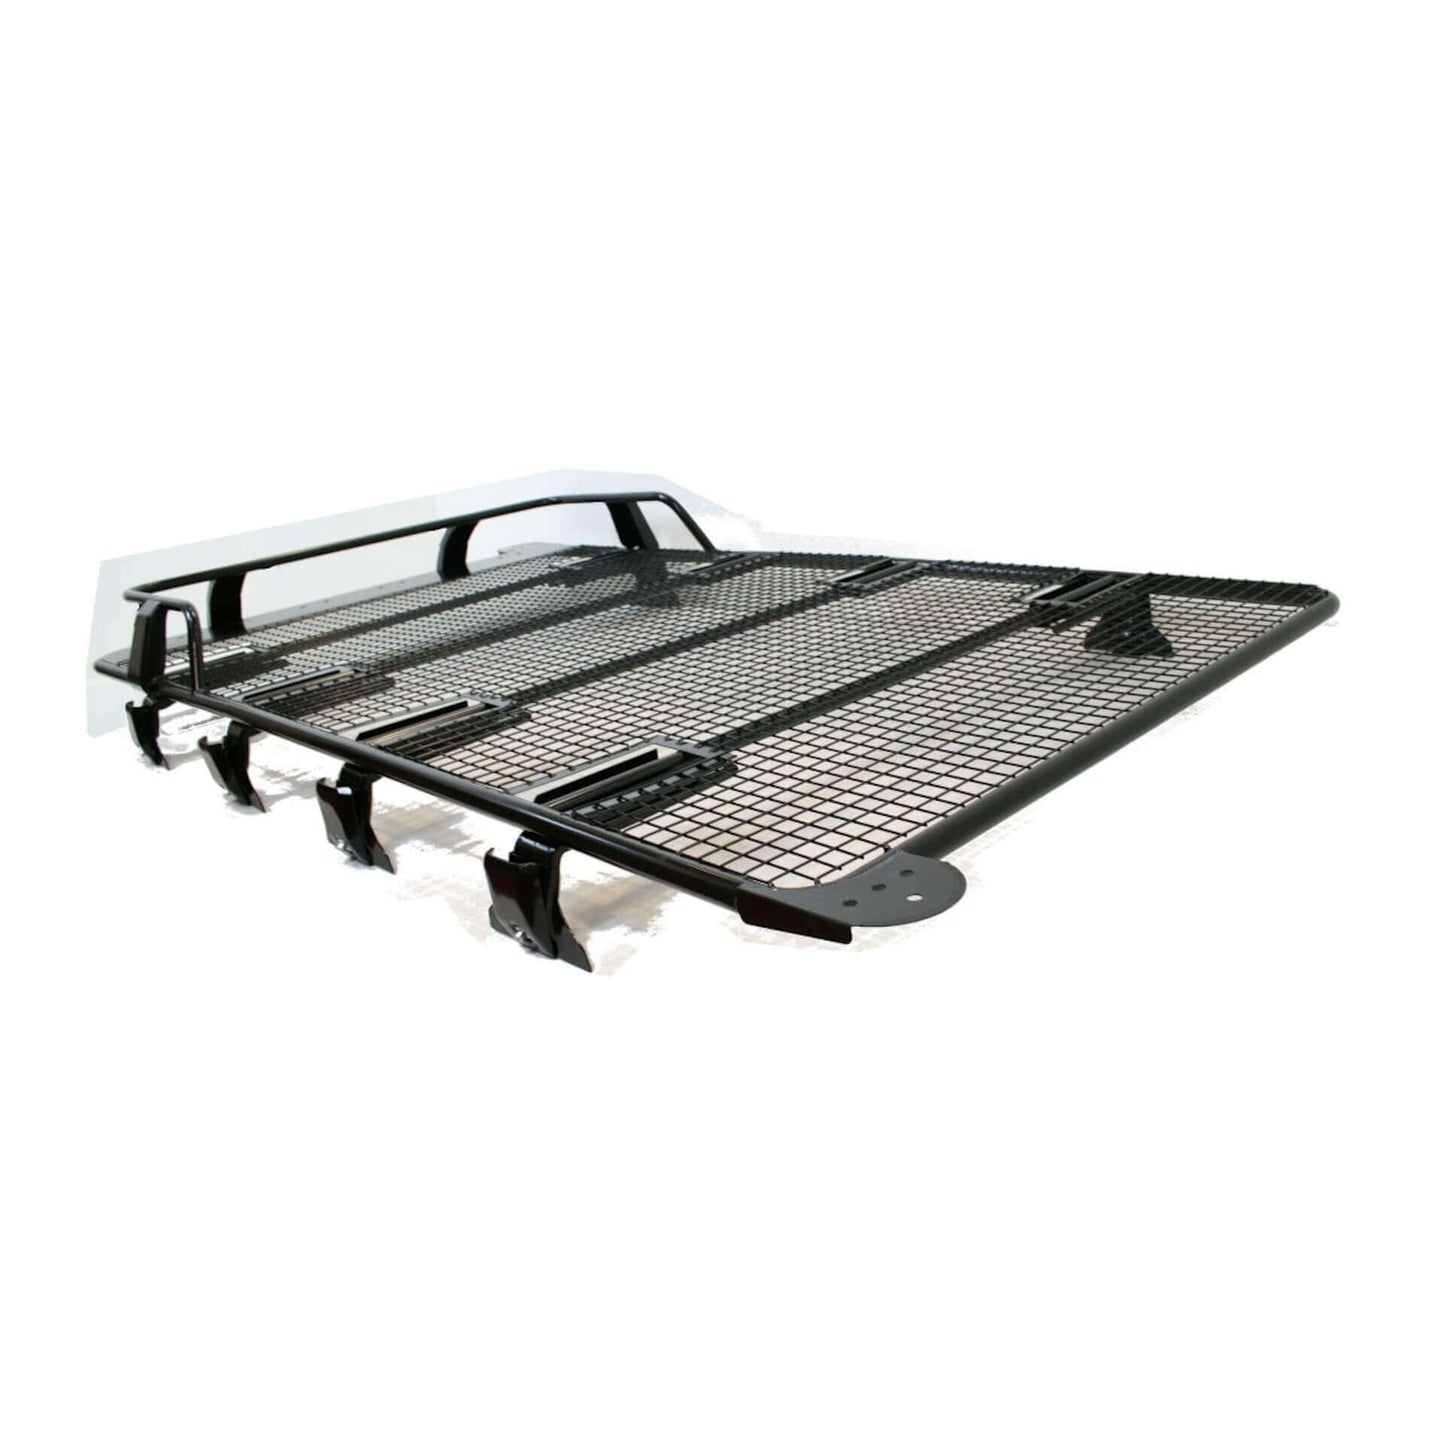 Expedition Steel Front Basket Roof Rack for Land Rover Discovery 3 and 4